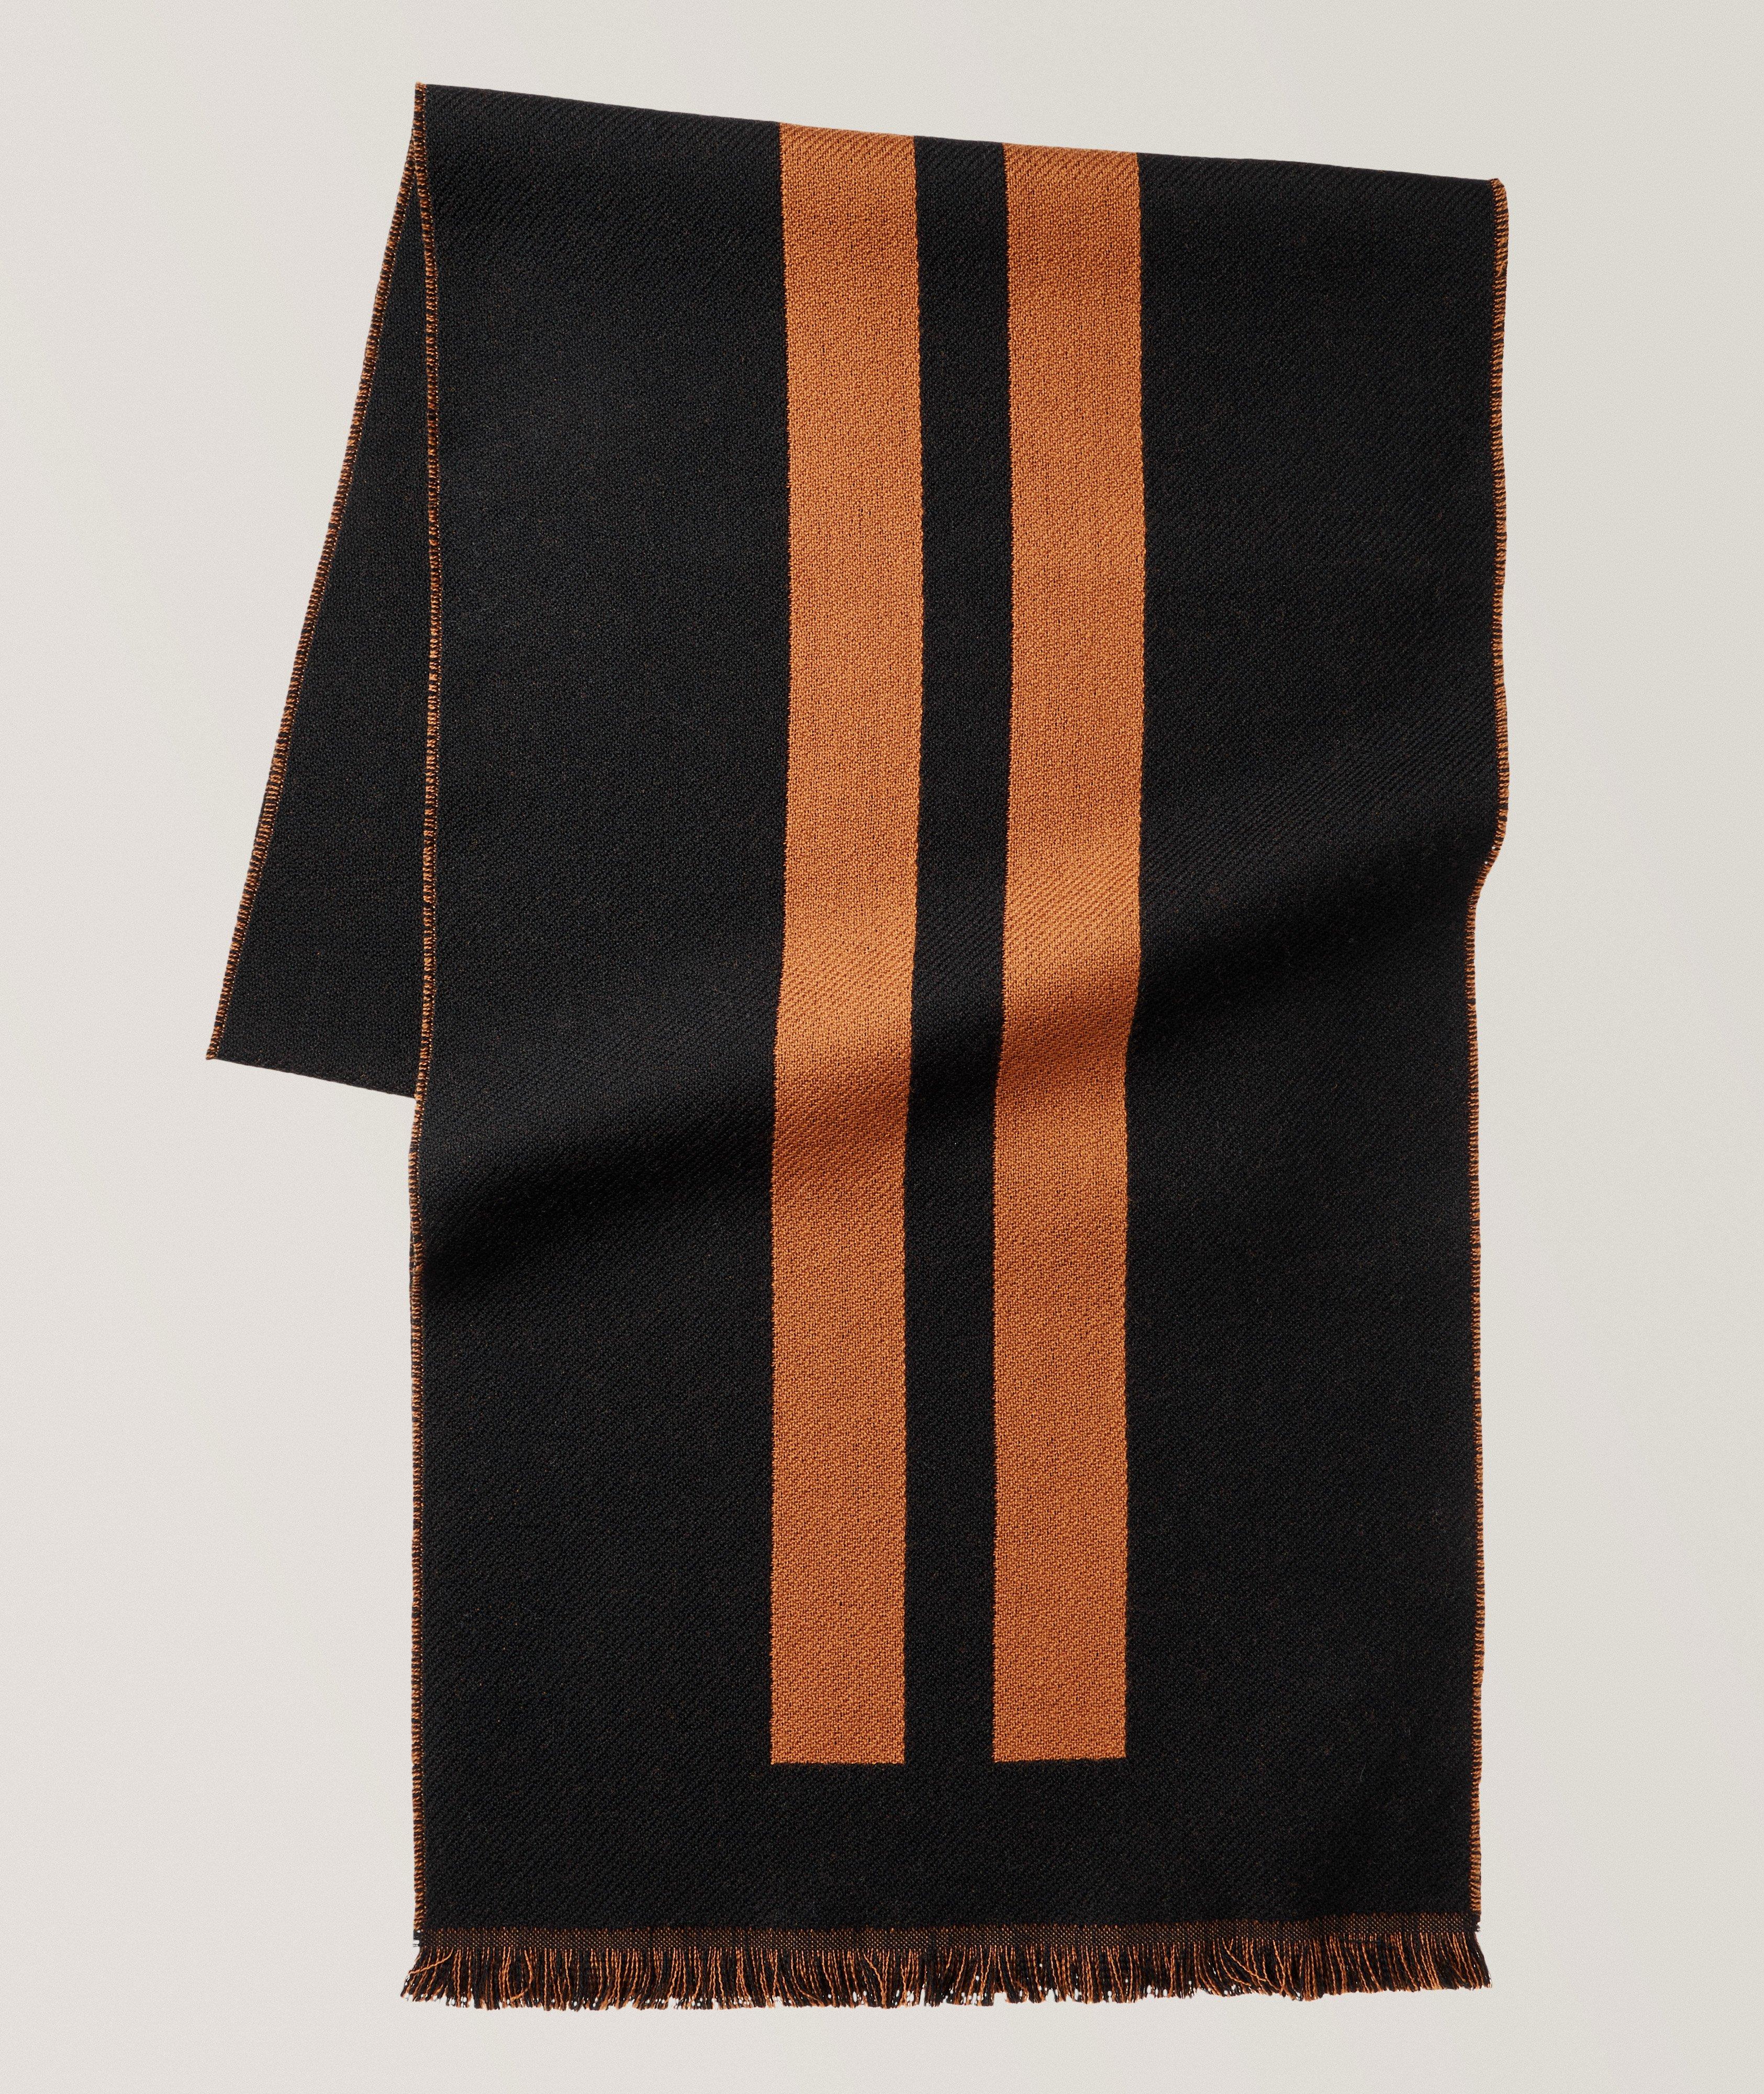 Signifier Wool Scarf image 0